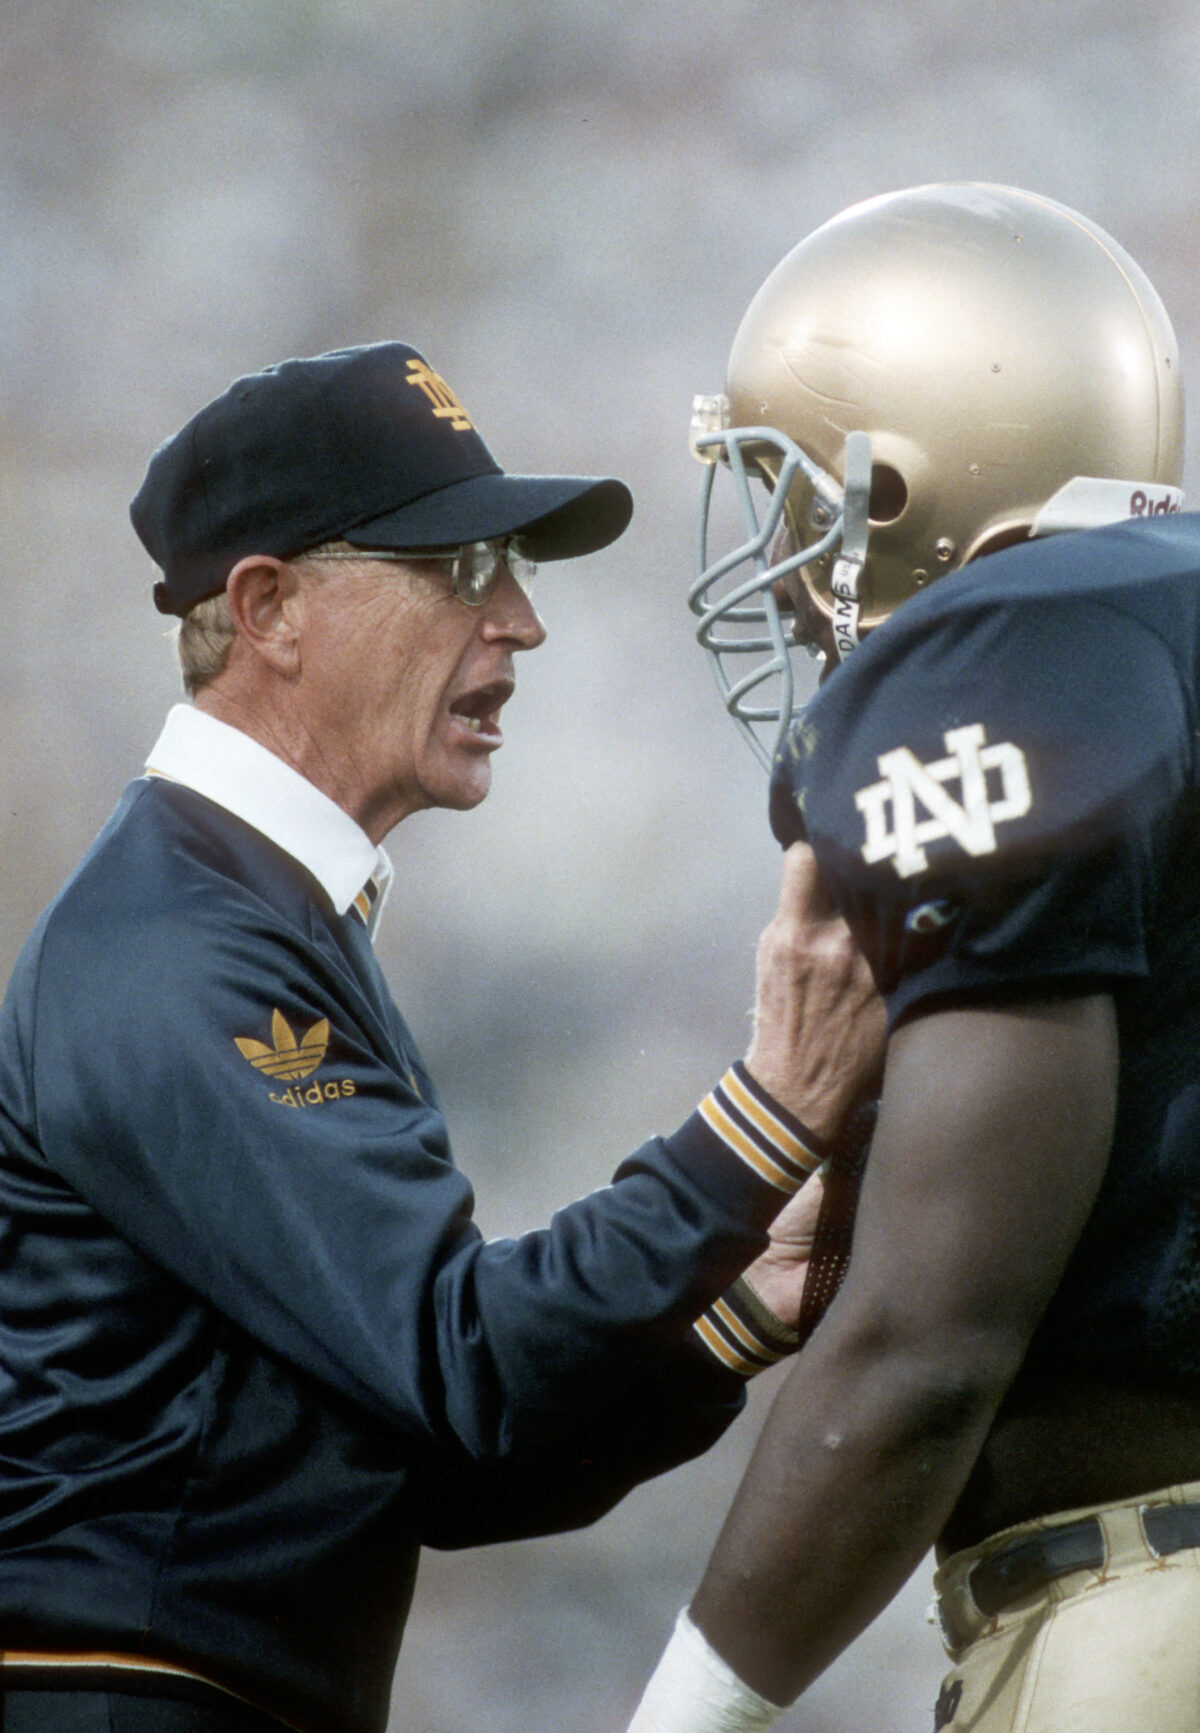 Watch: Lou Holtz works magic in giving Notre Dame players a pep talk